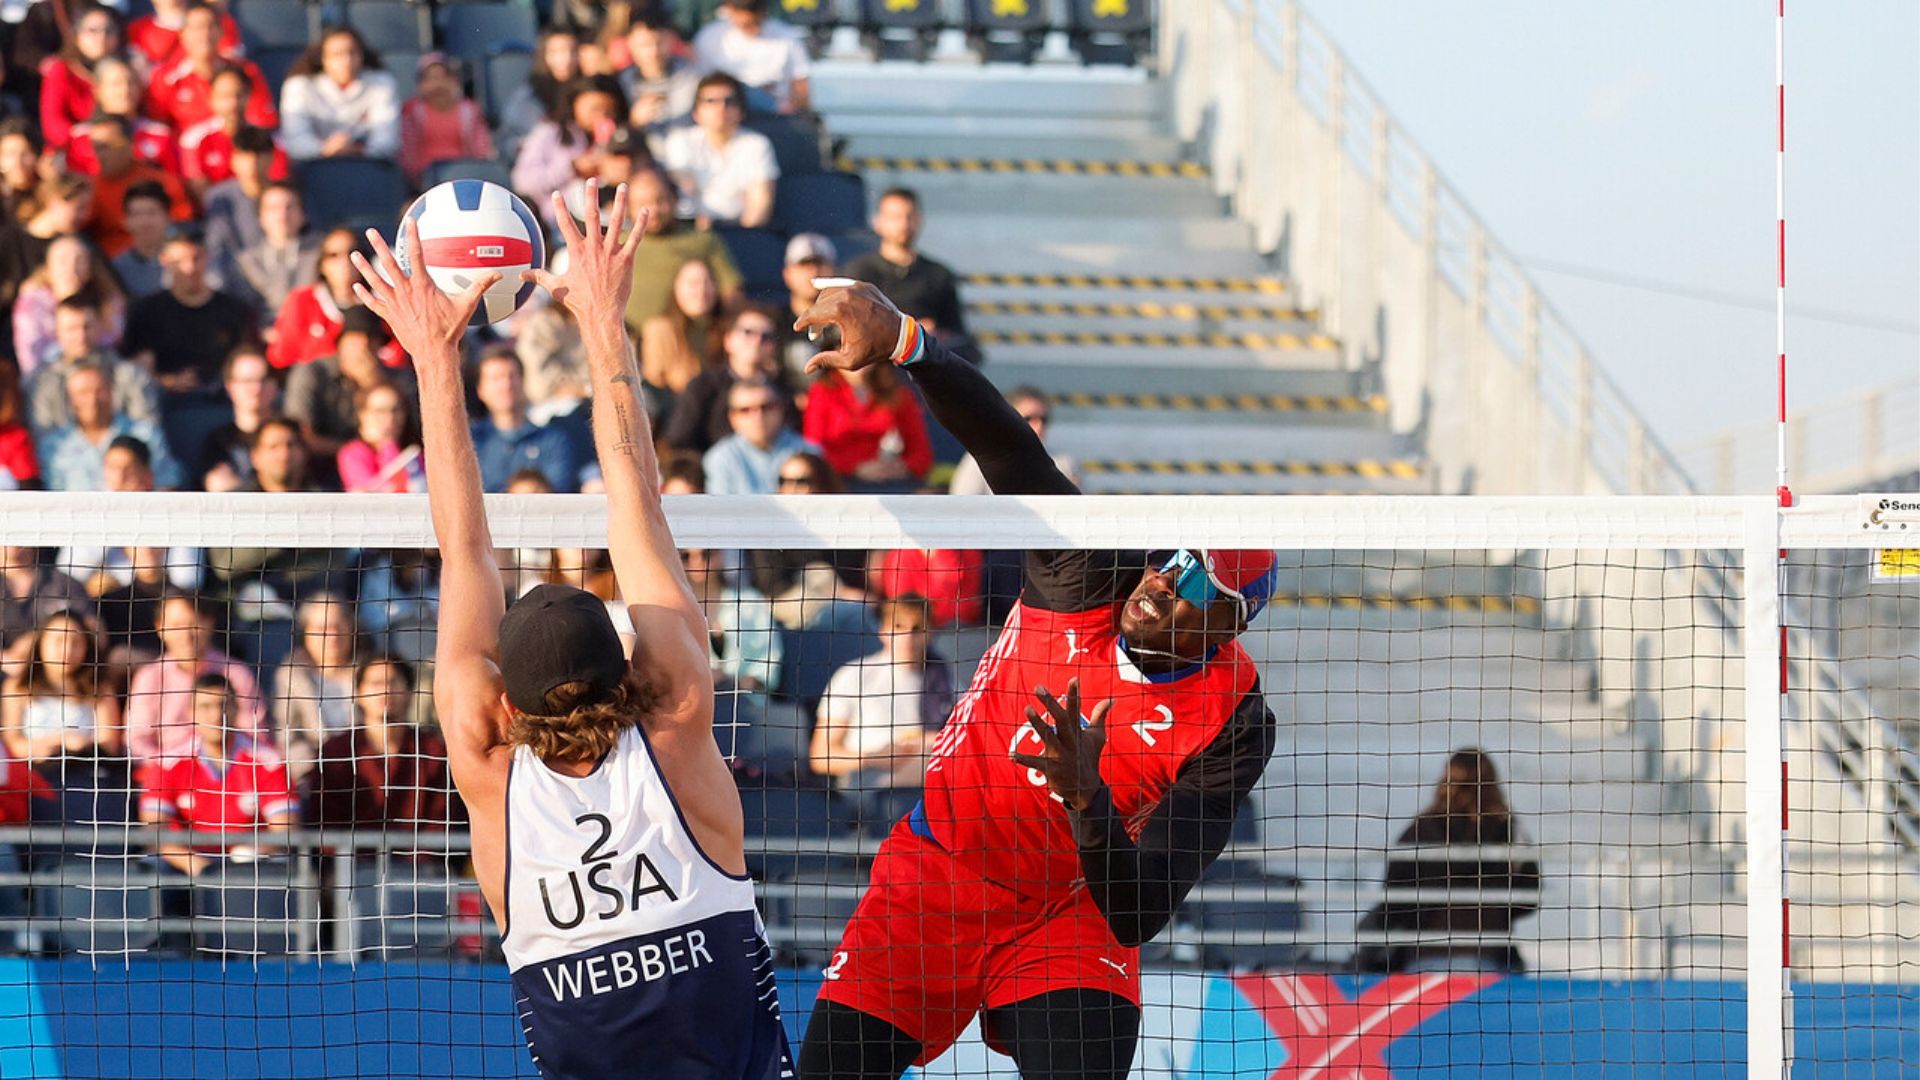 Cuba goes after the Olympic gold in beach volleyball